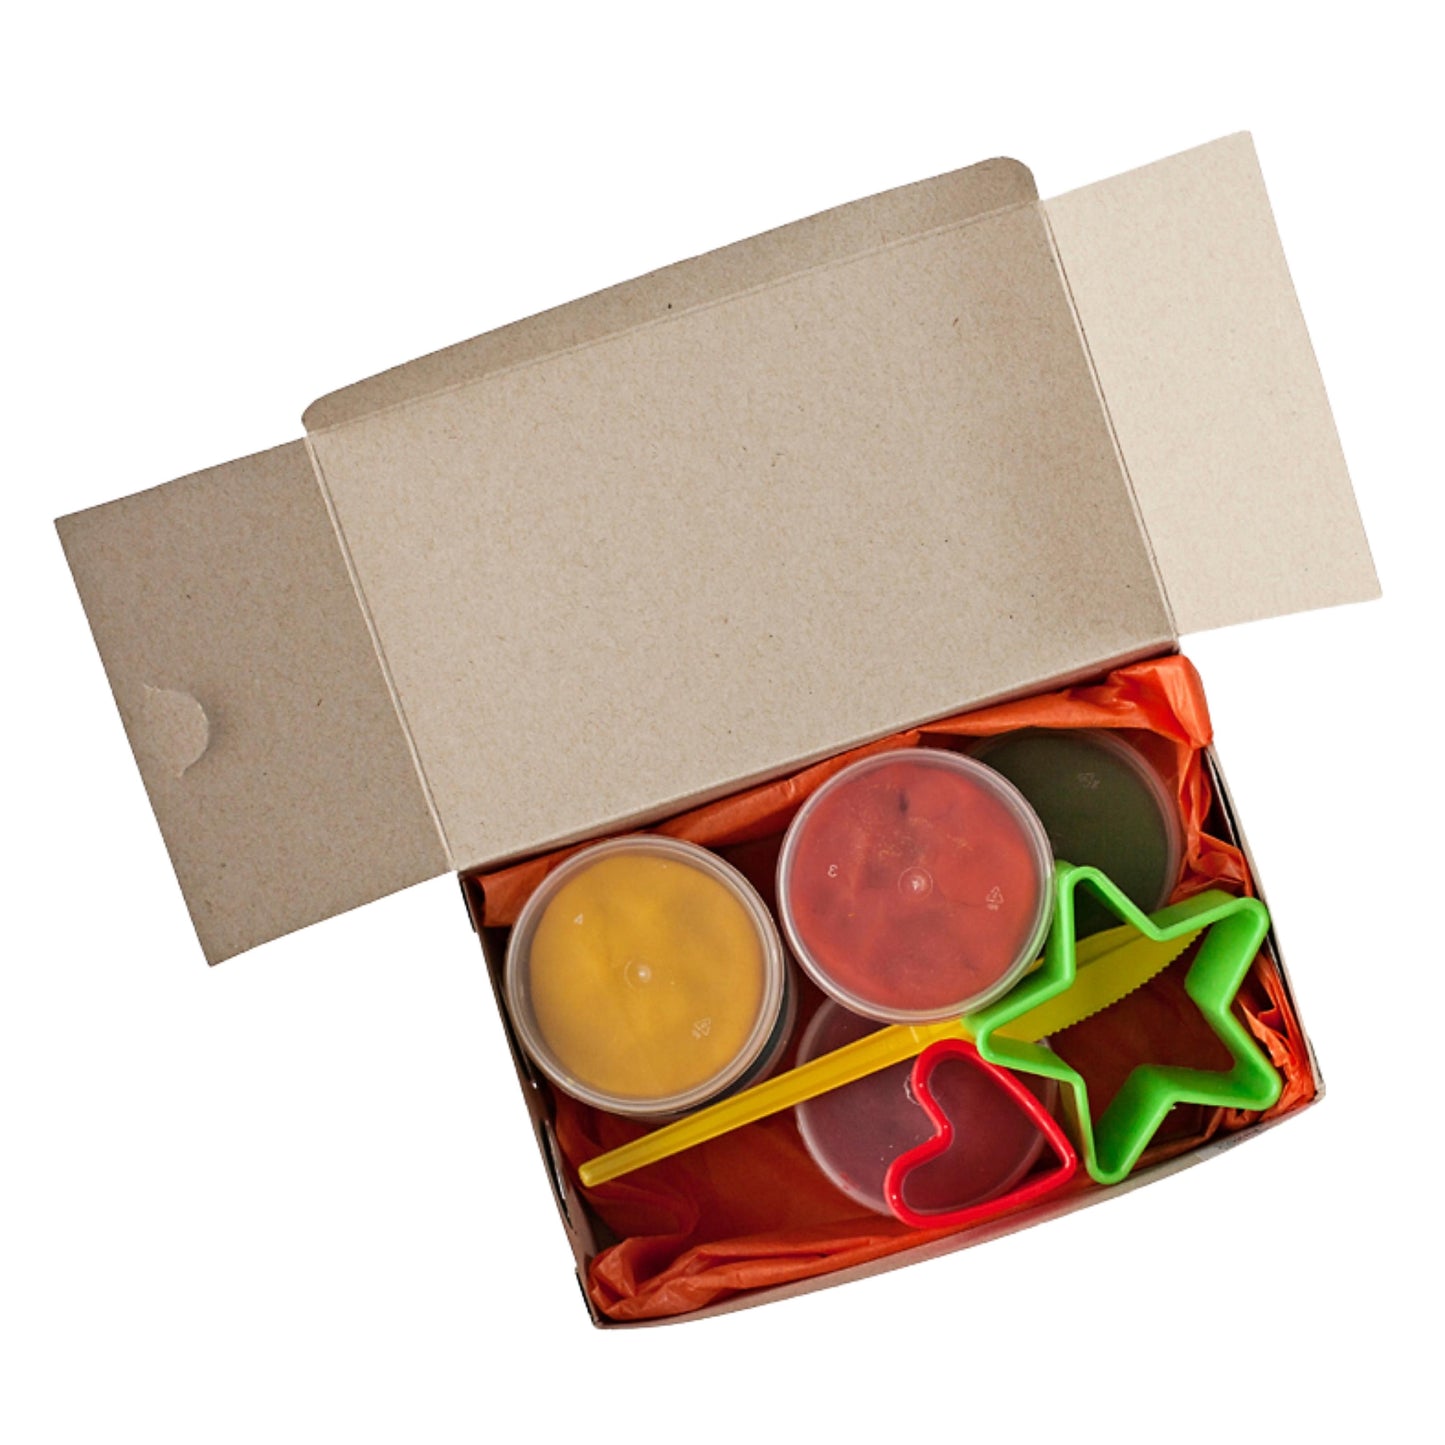 Primary Colours Play Dough Set